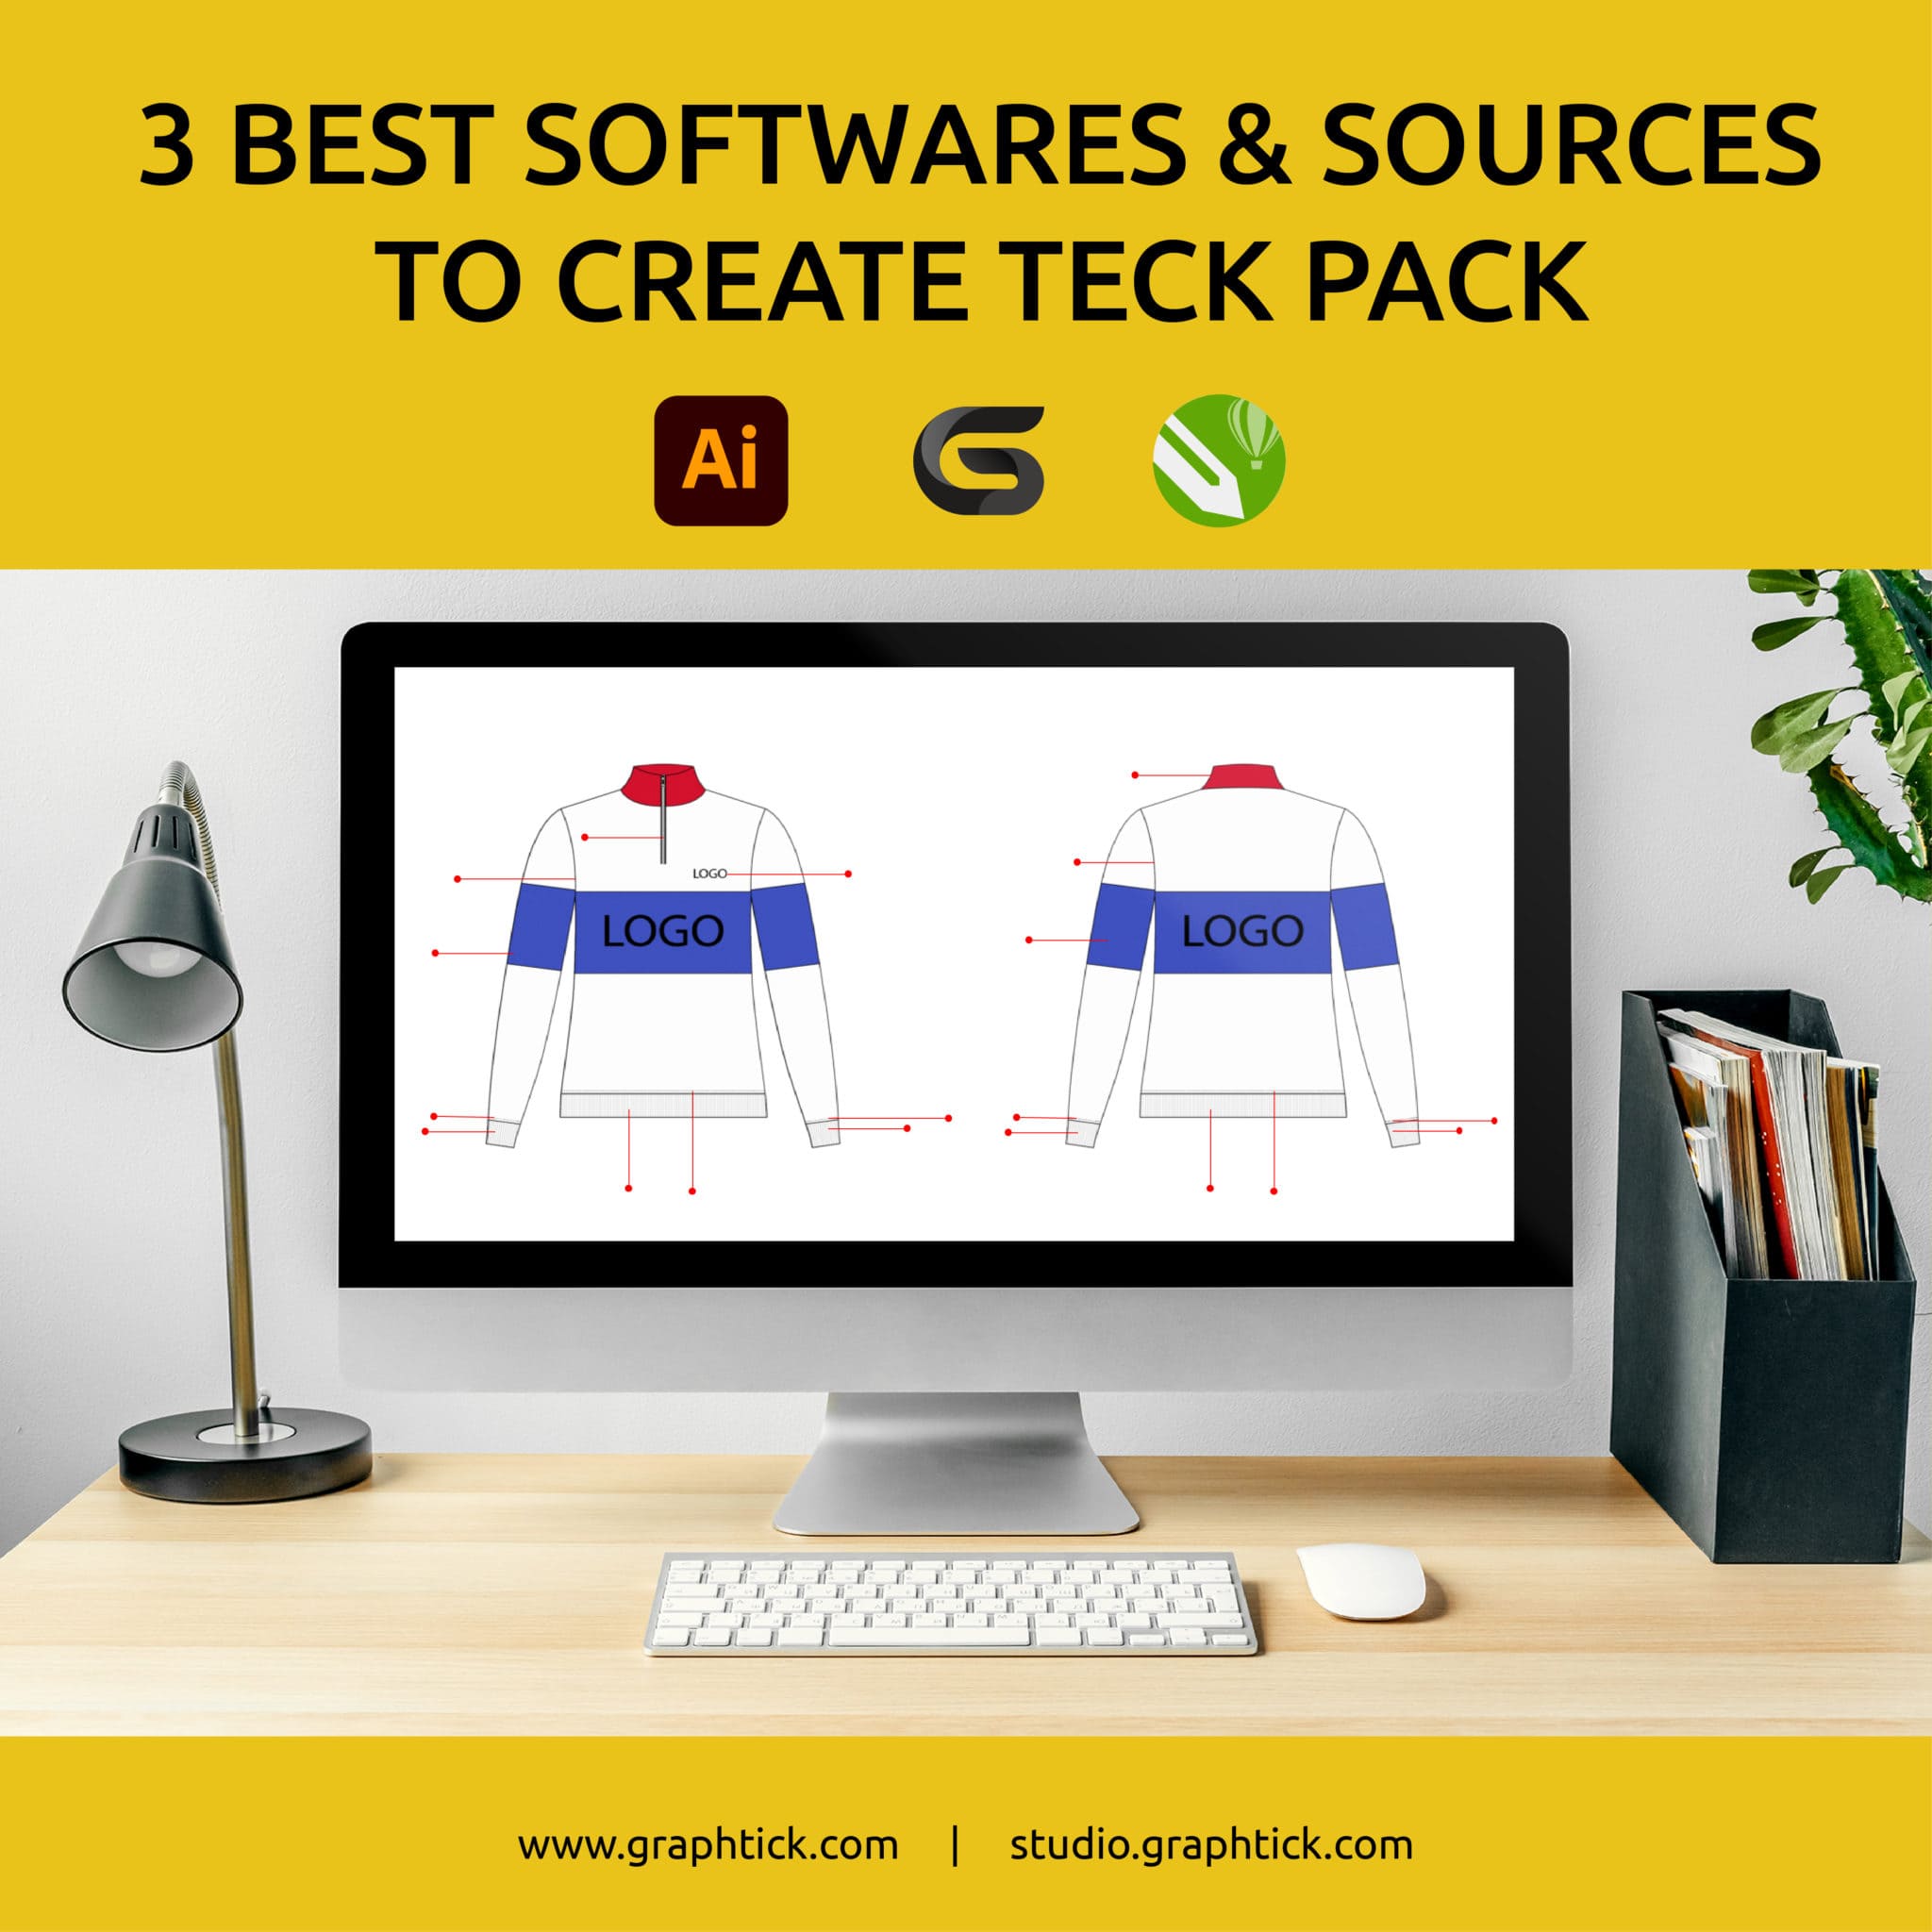 Best software for tech pack